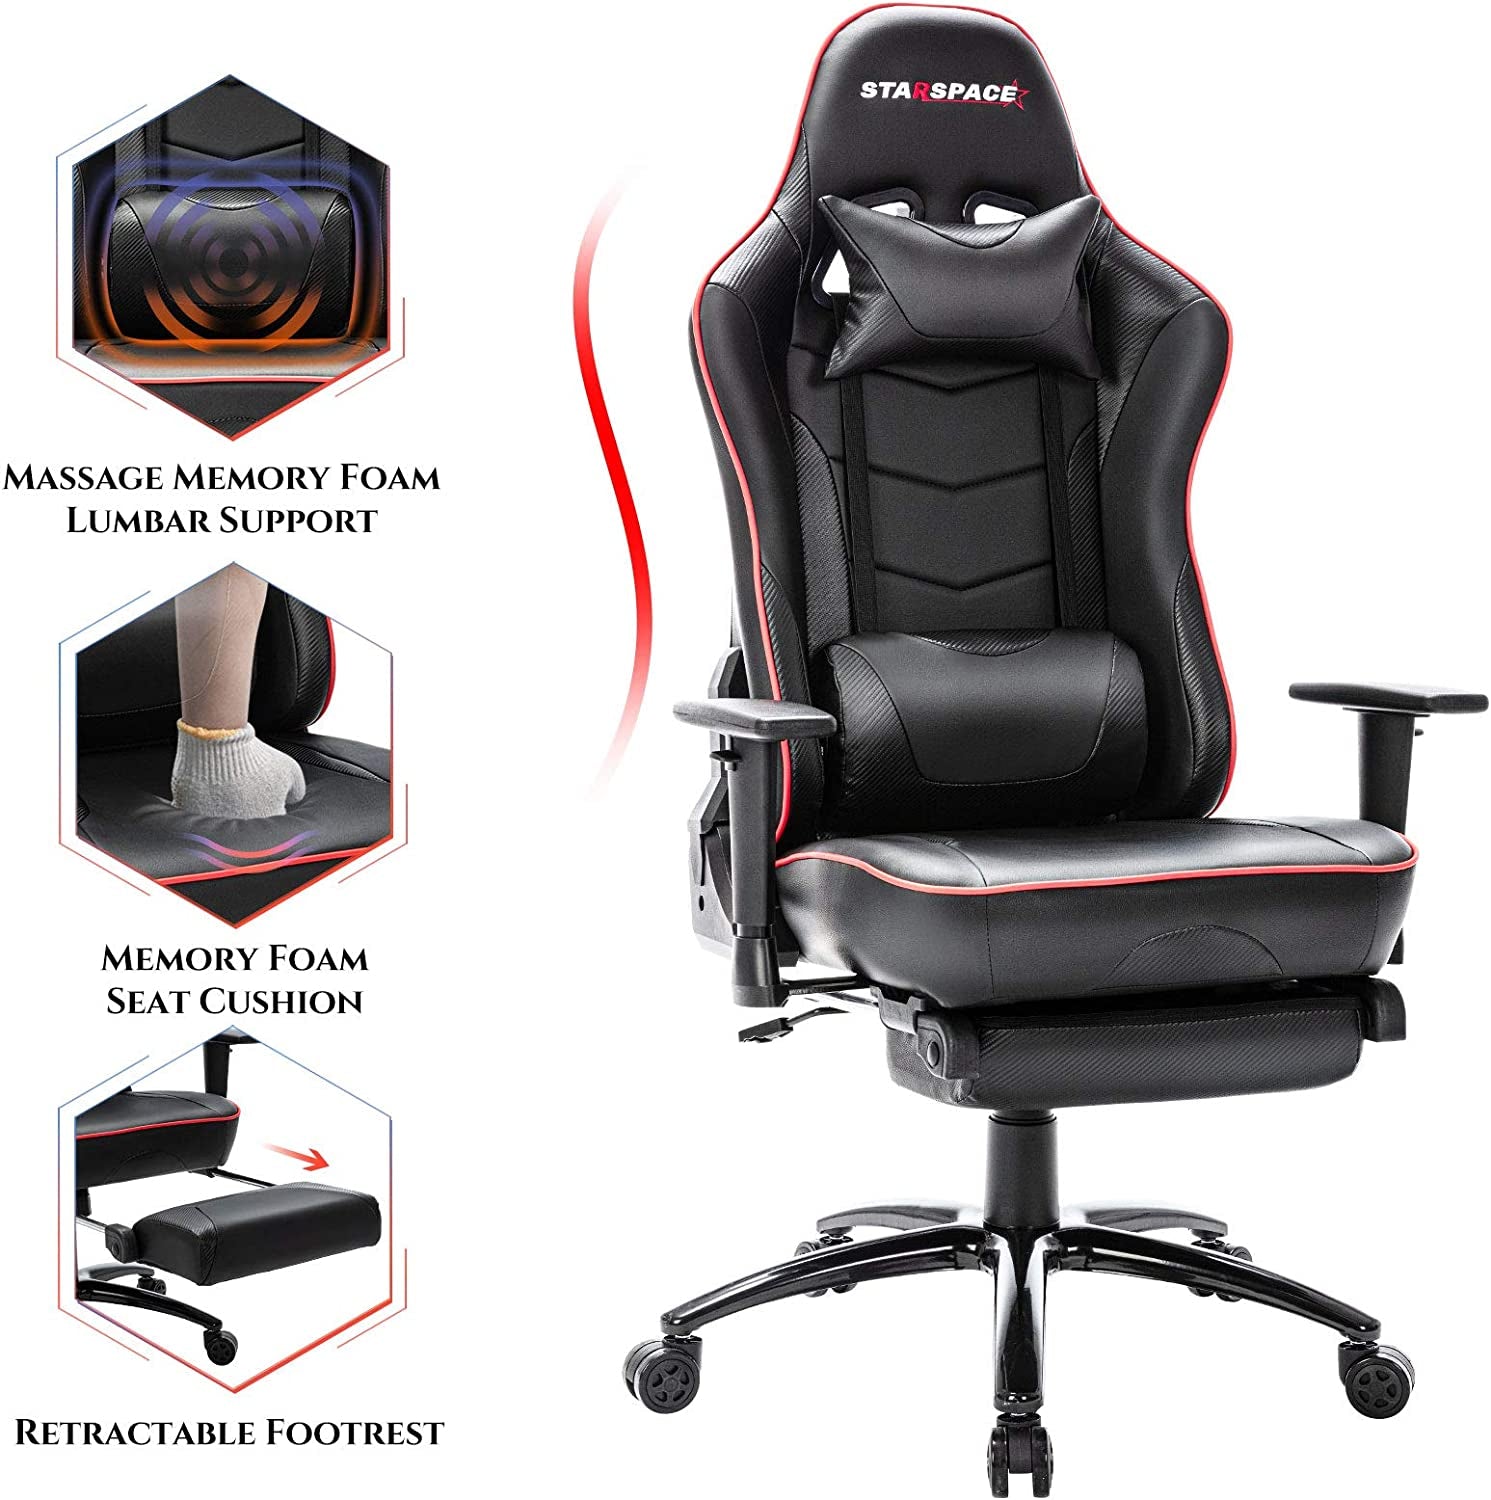 Gaming Chair Office Chair 300Lbs Massage Computer Chair Reclining Racing Chair with Headrest and Lumbar Support for Adults Teens Desk Chair (Black)